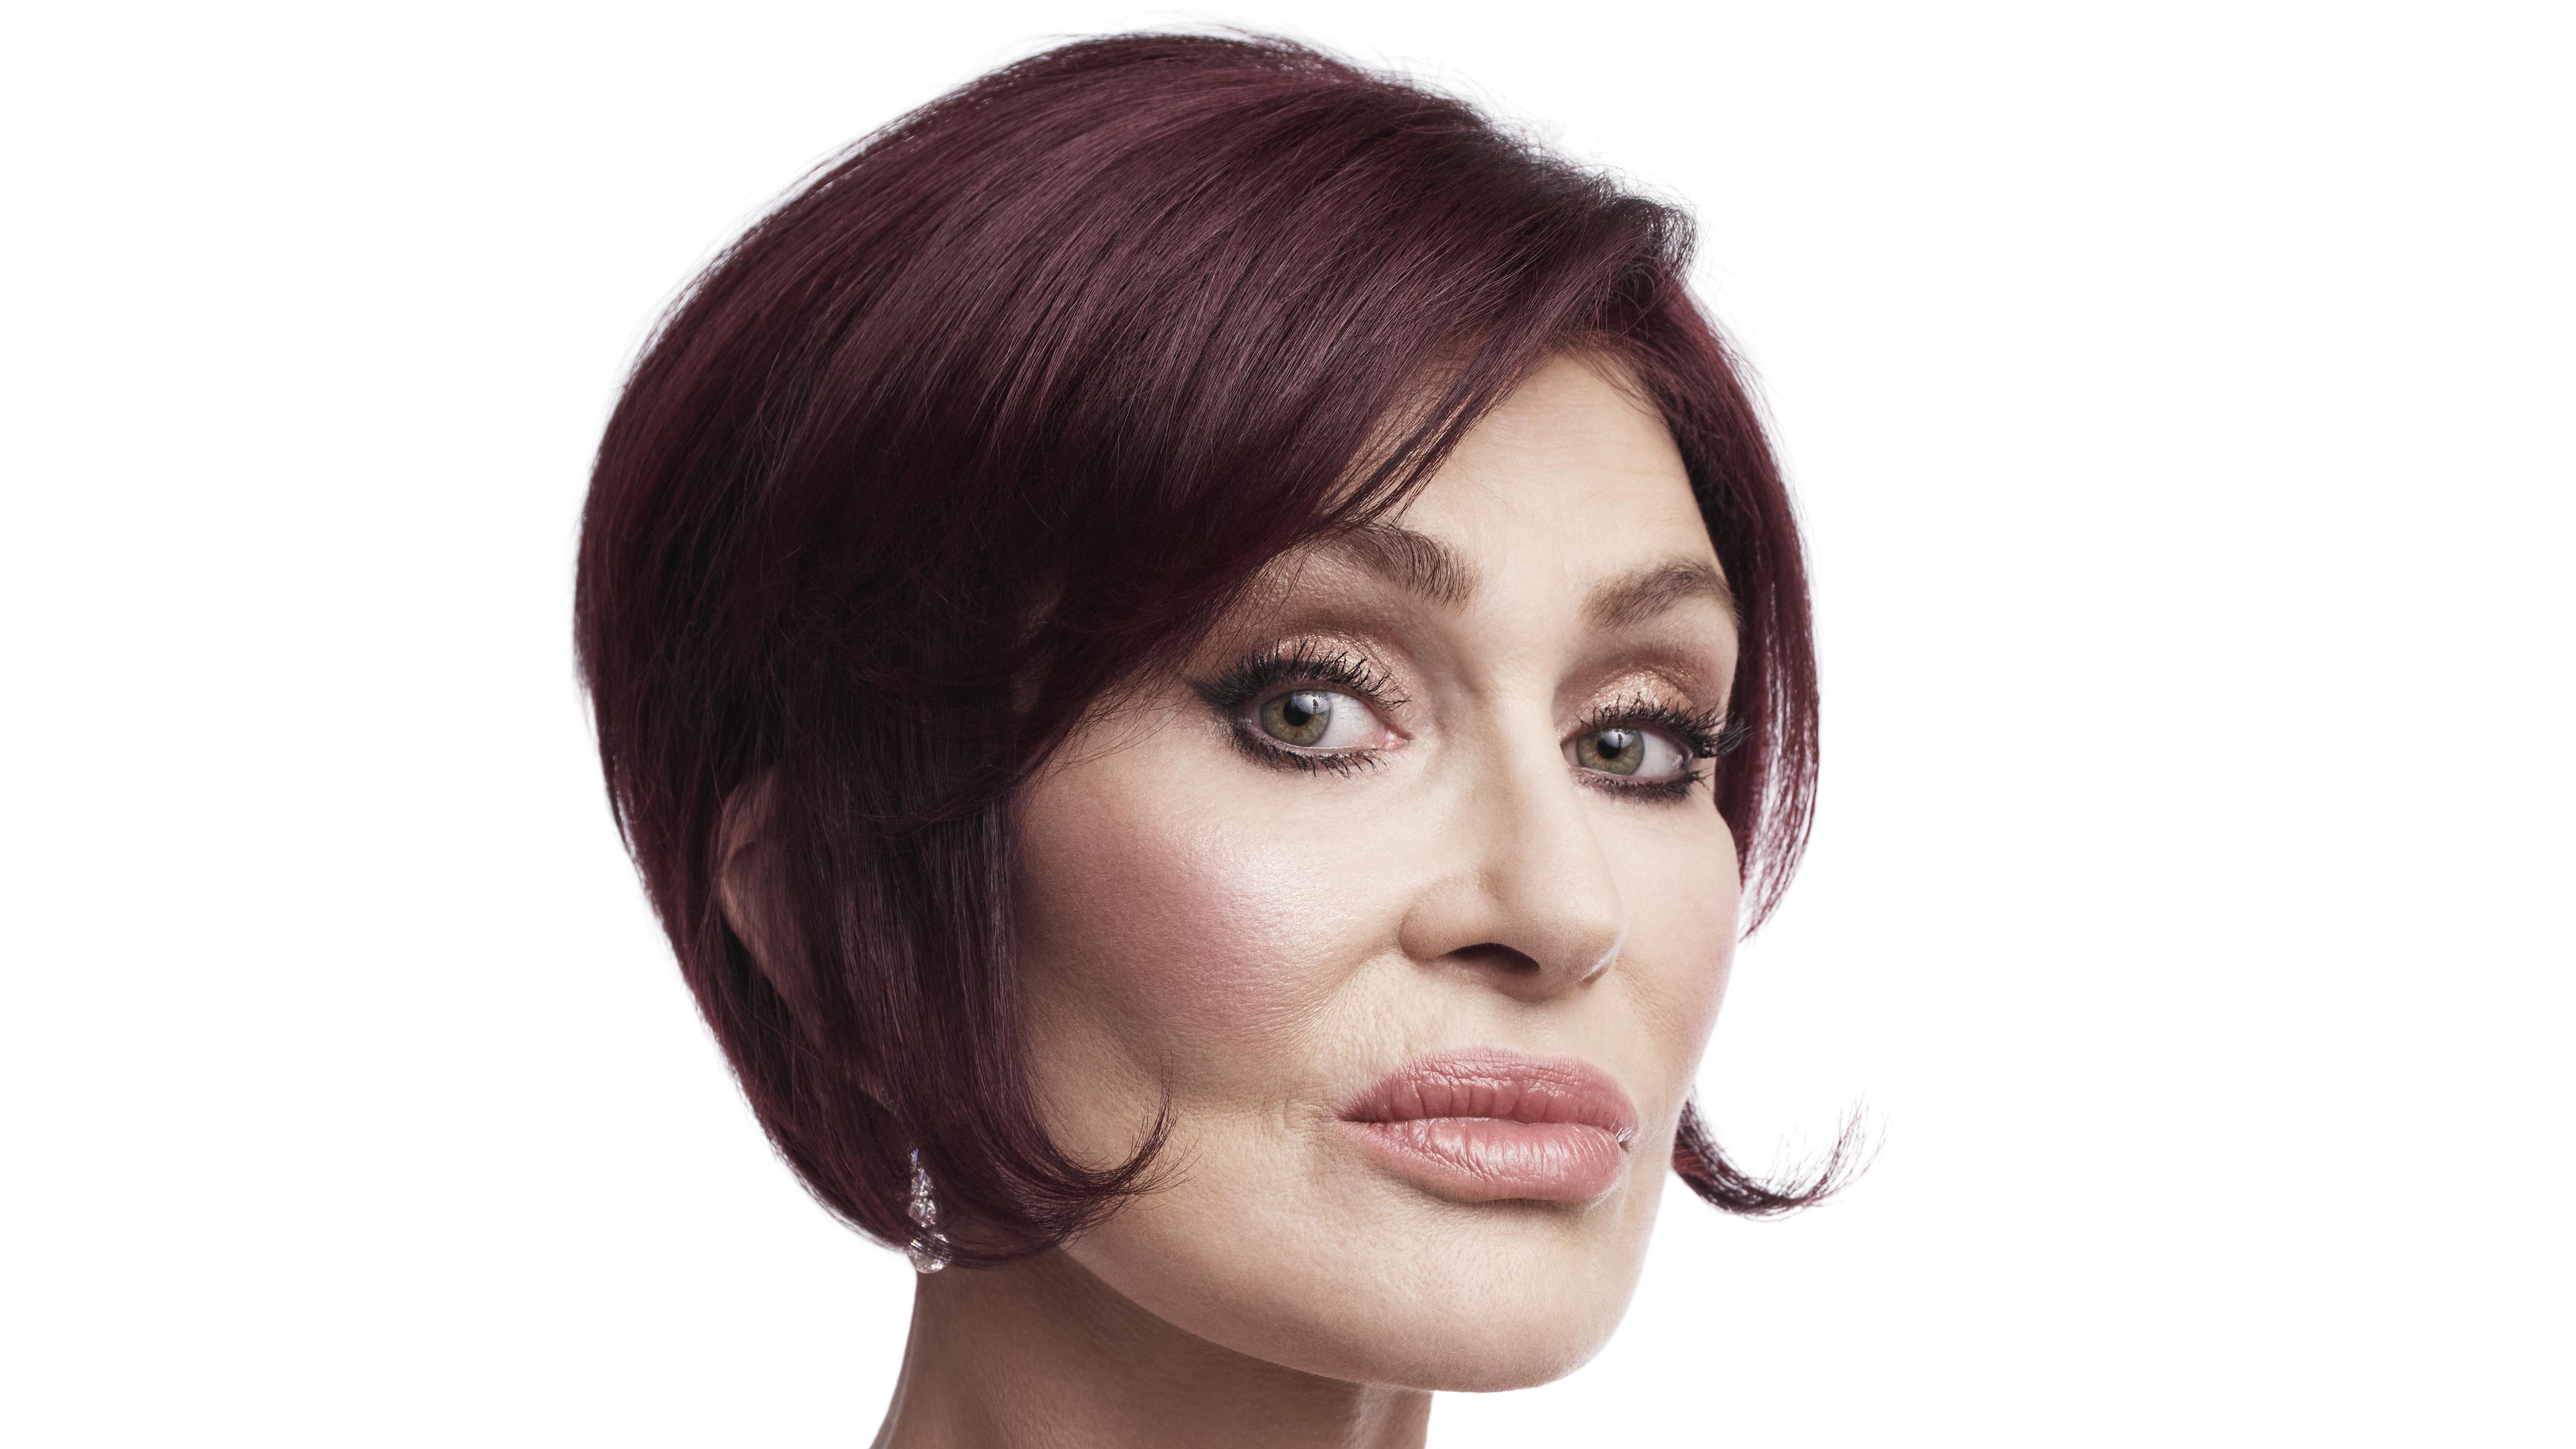 Sharon Osbourne: ‘Everyone is scared of saying something wrong. It’s no way to live’